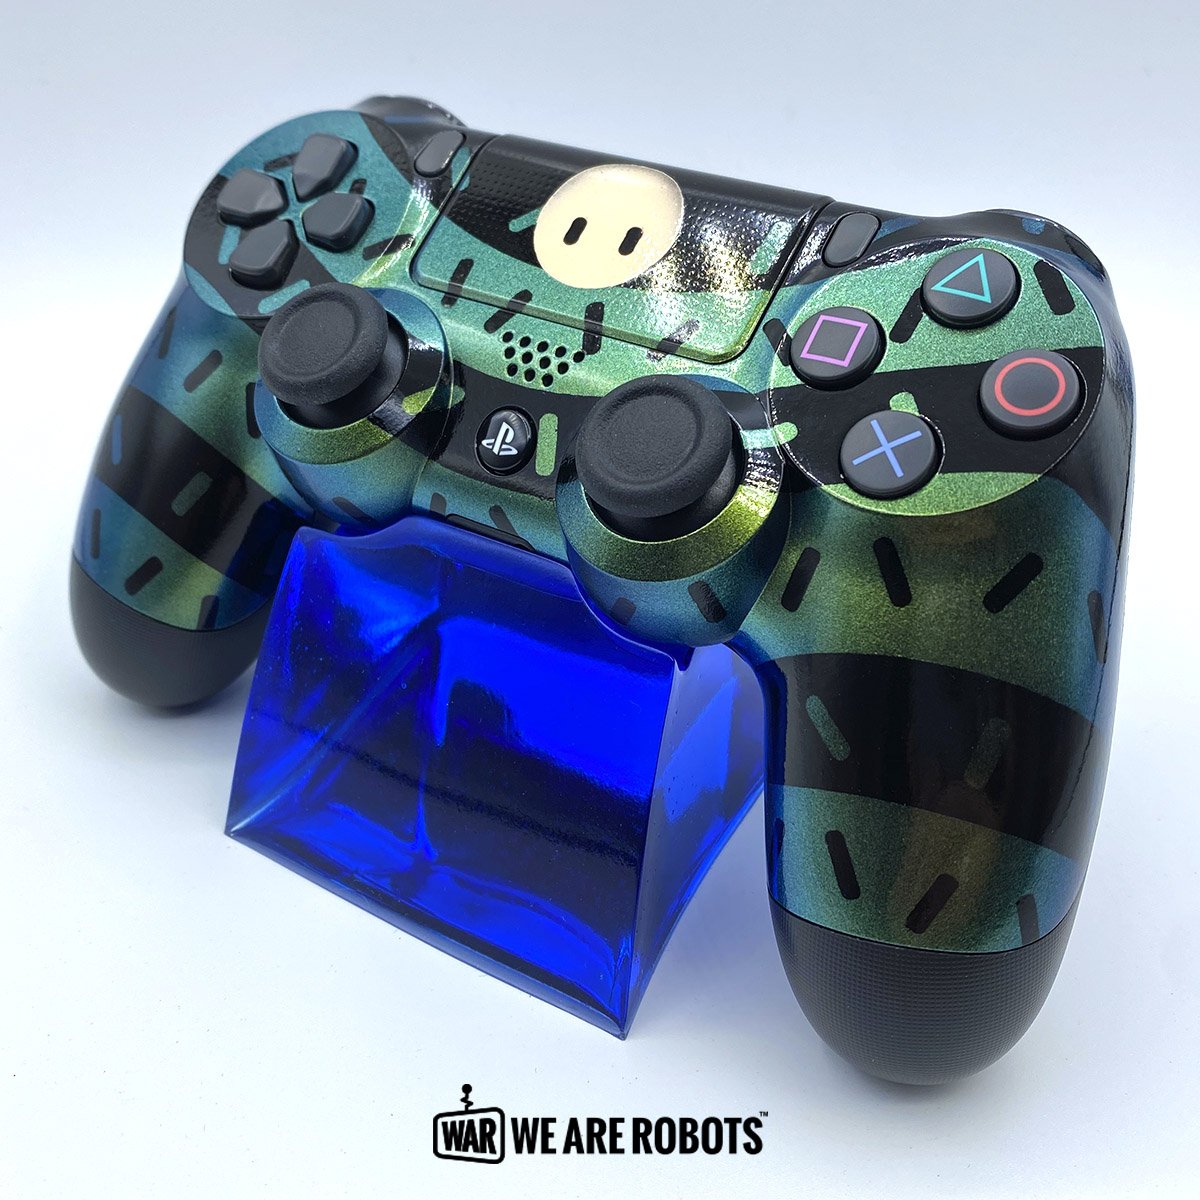 We Are Robots - Fall Guys - PS4 Controller